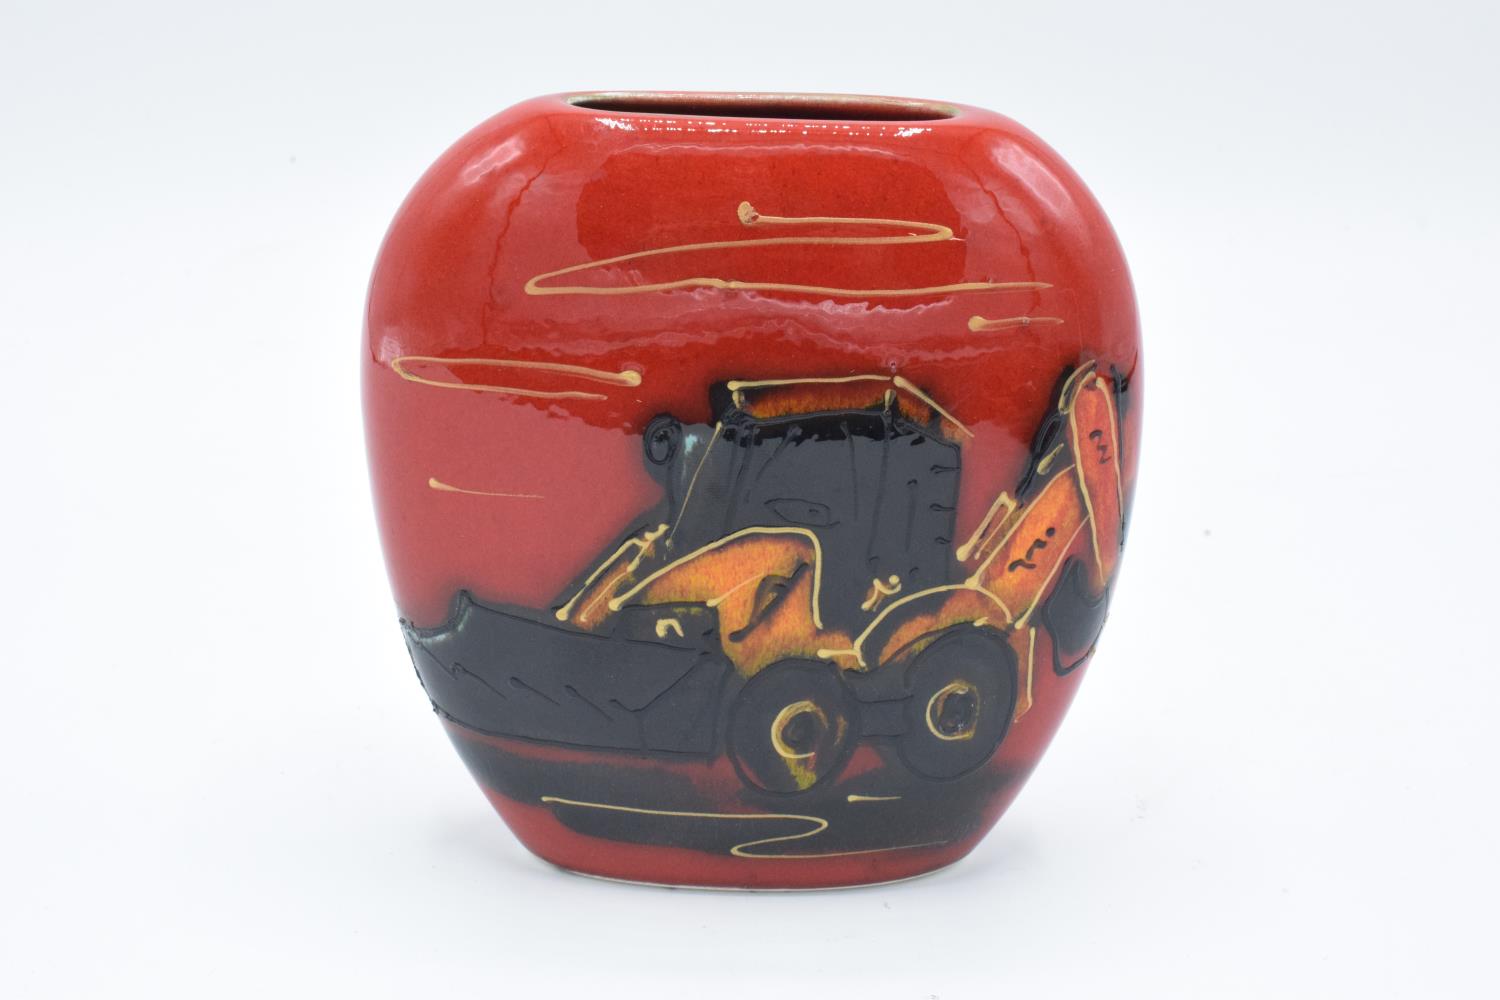 Anita Harris Art Pottery limited edition vase of a Digger: produced in an exclusive edition of 25 fo